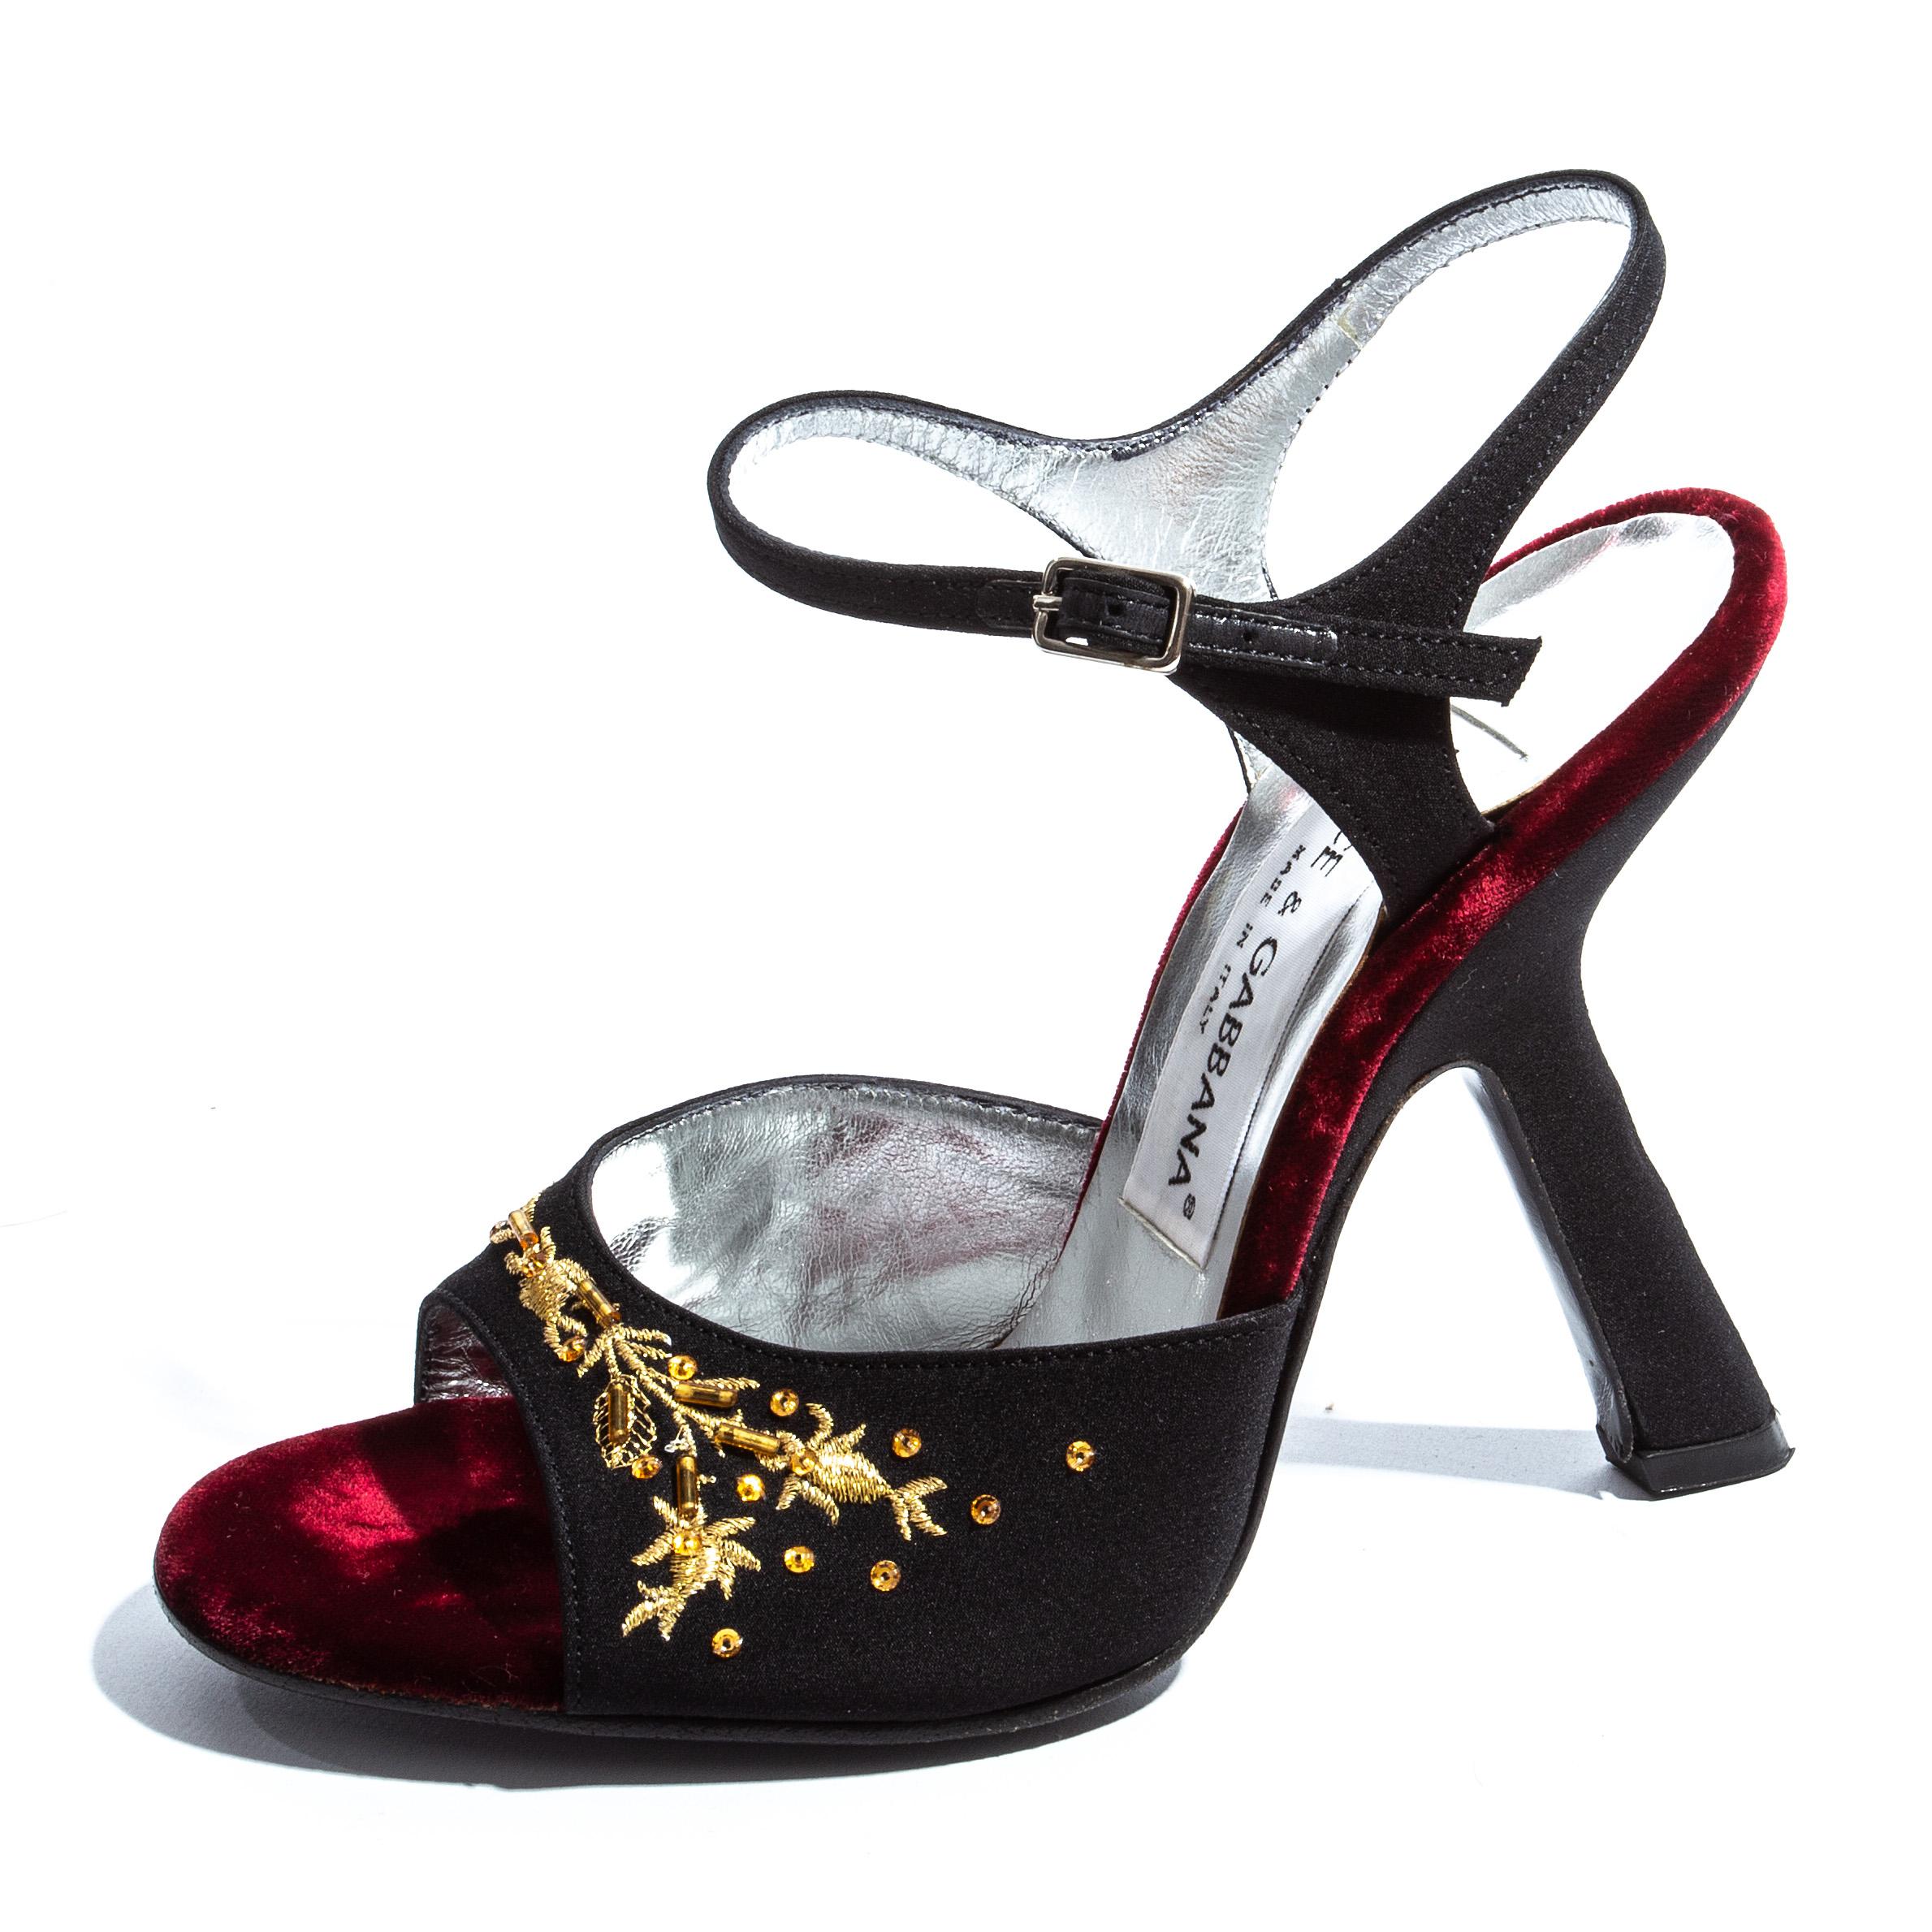 Dolce & Gabbana black silk evening heels with gold embroidery, silver leather and red velvet interior and buckle fastening on ankle.

Spring-Summer 1998

Size: 35.5